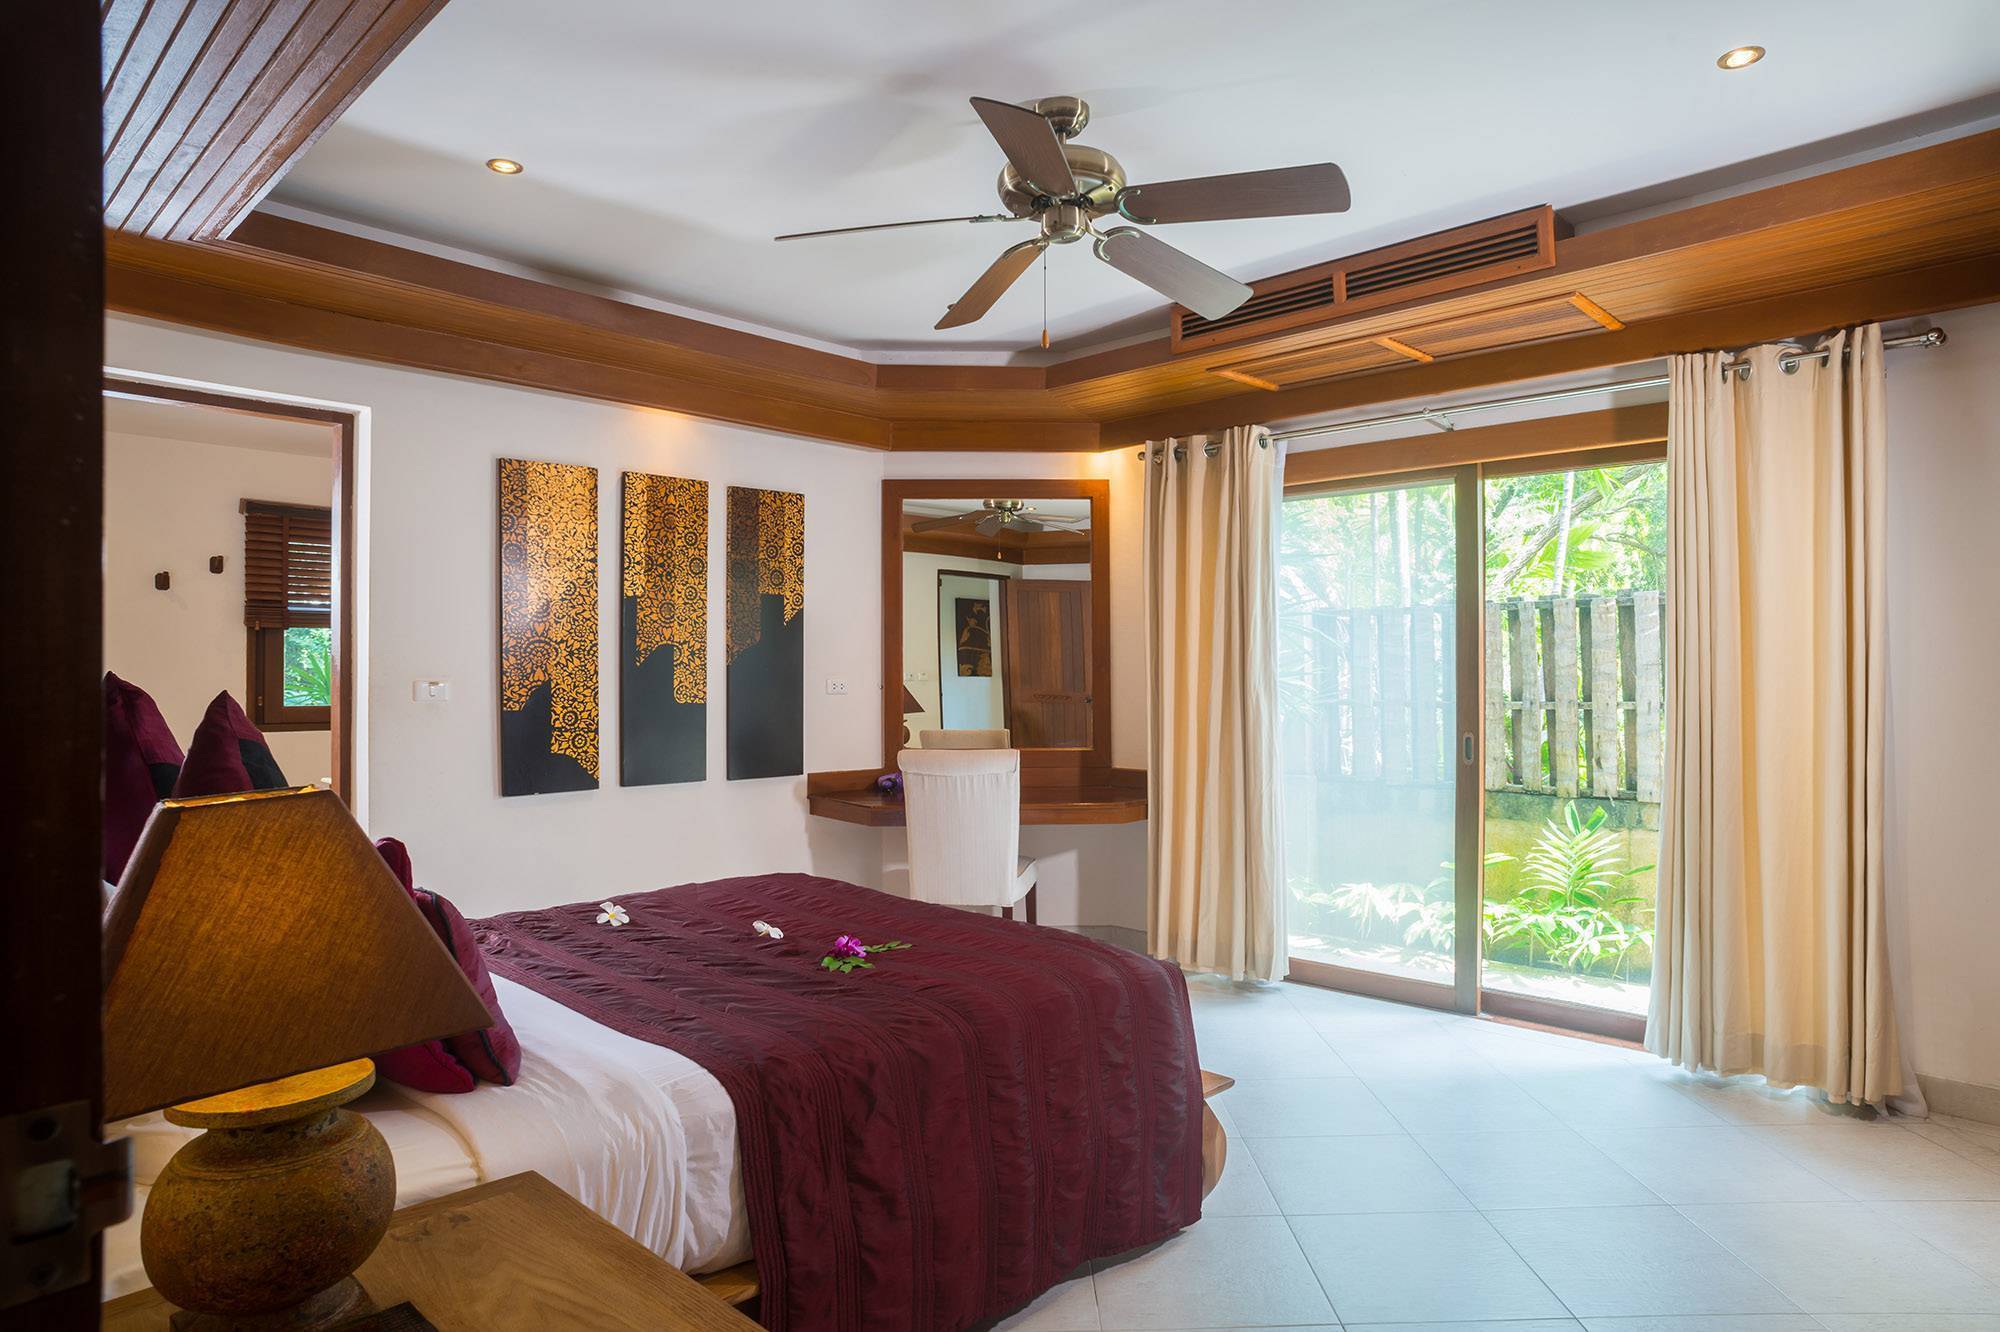 Tropical 4-bedroom beachside villa for sale in Hua Thanon: Tropical 4-bedroom beachside villa for sale in Hua Thanon